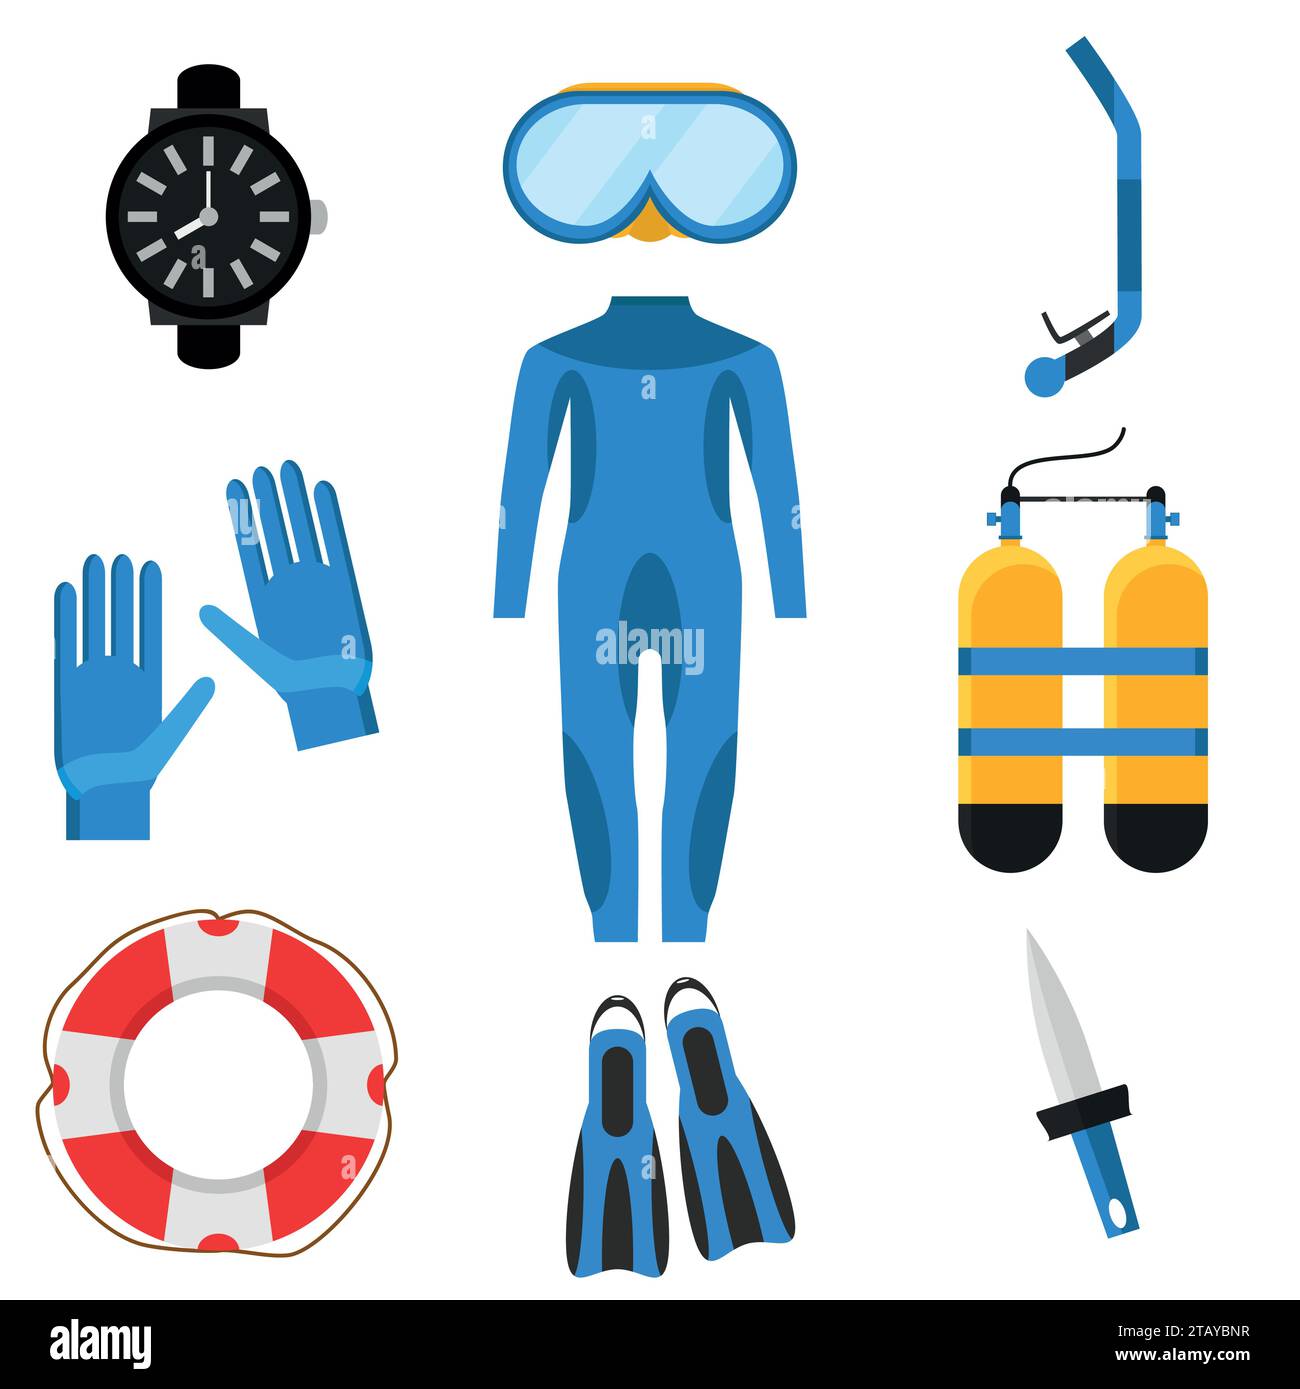 Collection of scuba diving. Diver wetsuit, scuba mask, snorkel, fins, oxygen cylinders, lifebuoy, flippers icons. Underwater activity diving equipment Stock Vector